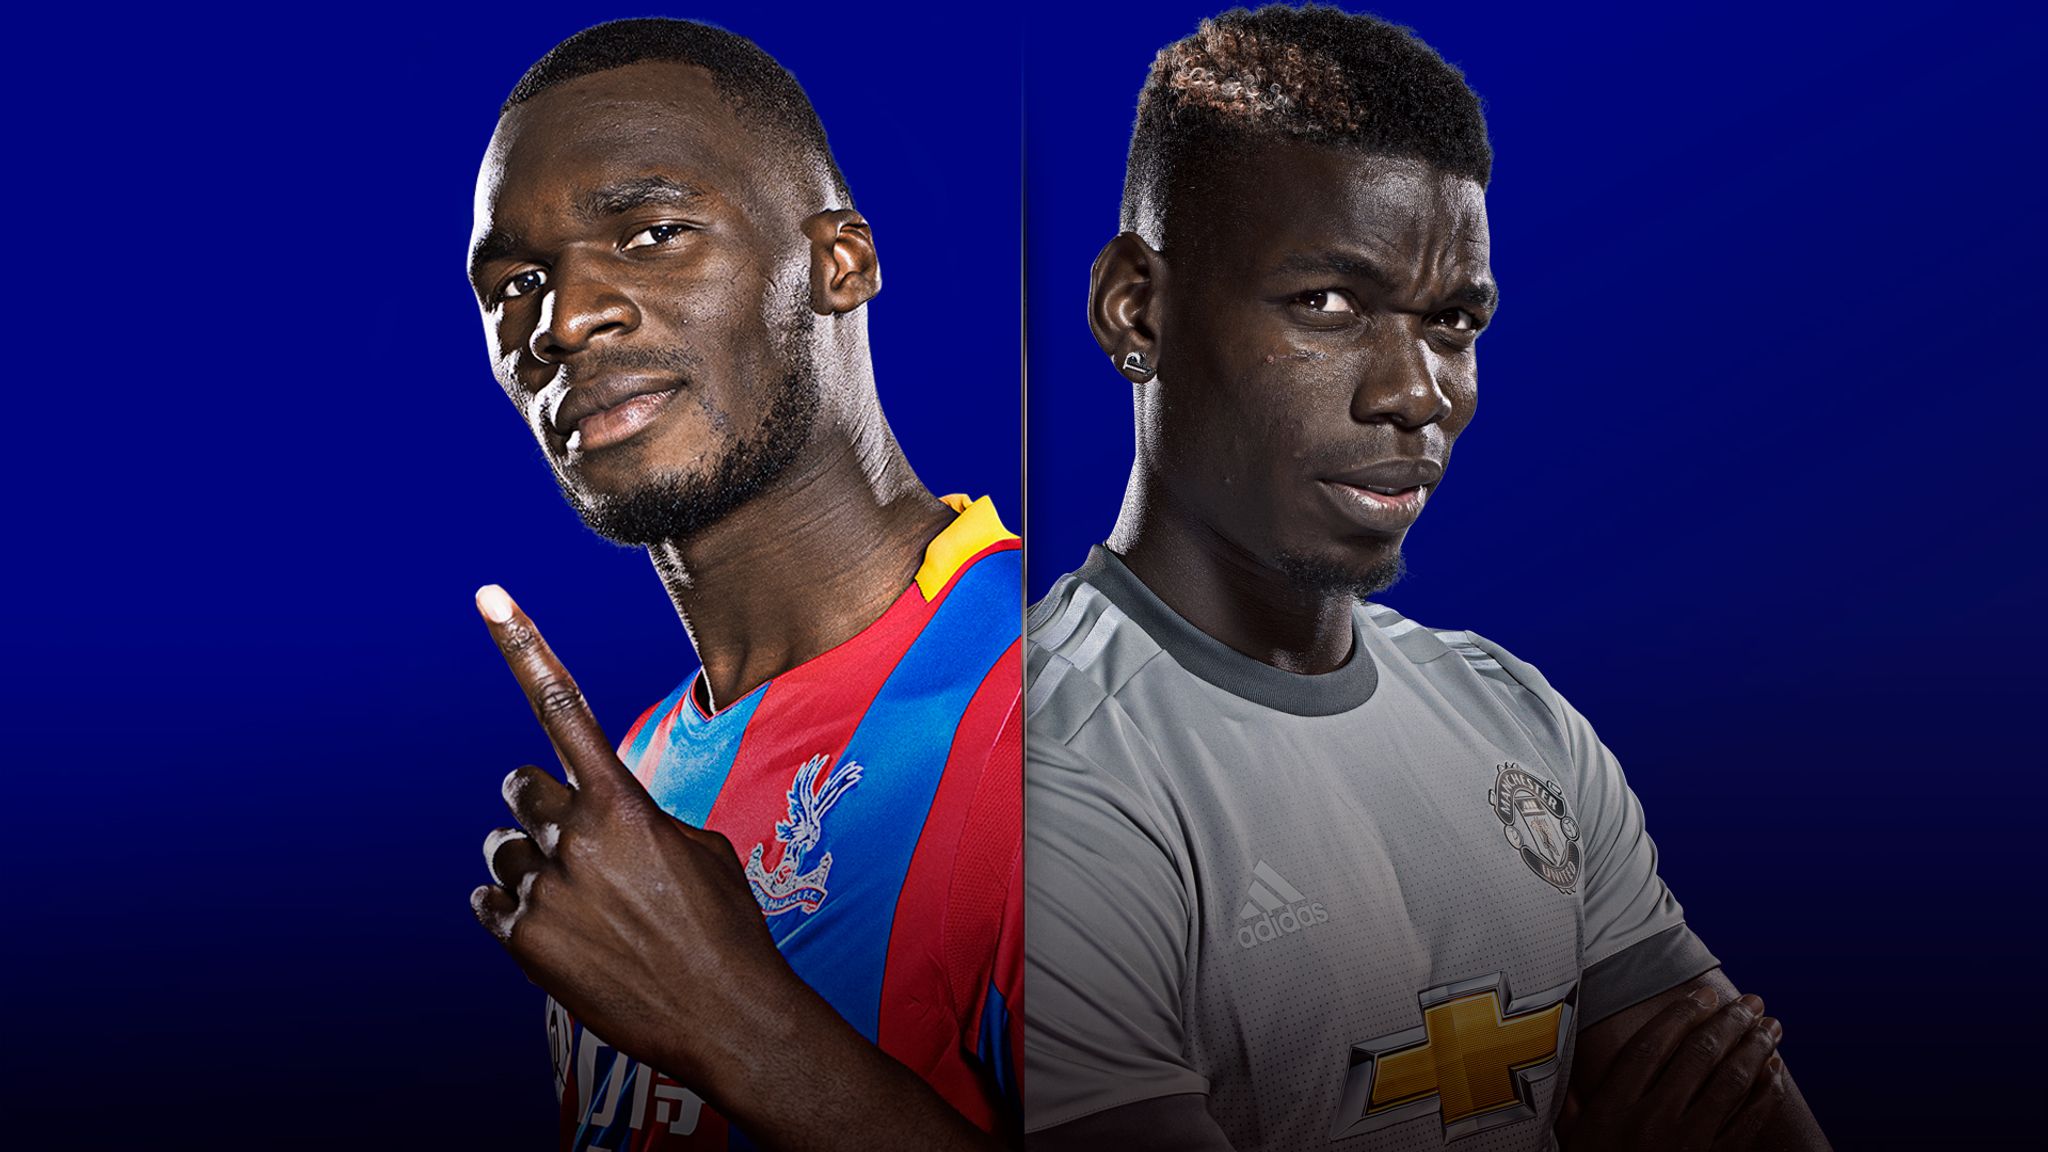 Crystal Palace V Man Utd Preview Eagles Have Made Big Strides Since Old Trafford Rout Says Roy Hodgson Football News Sky Sports